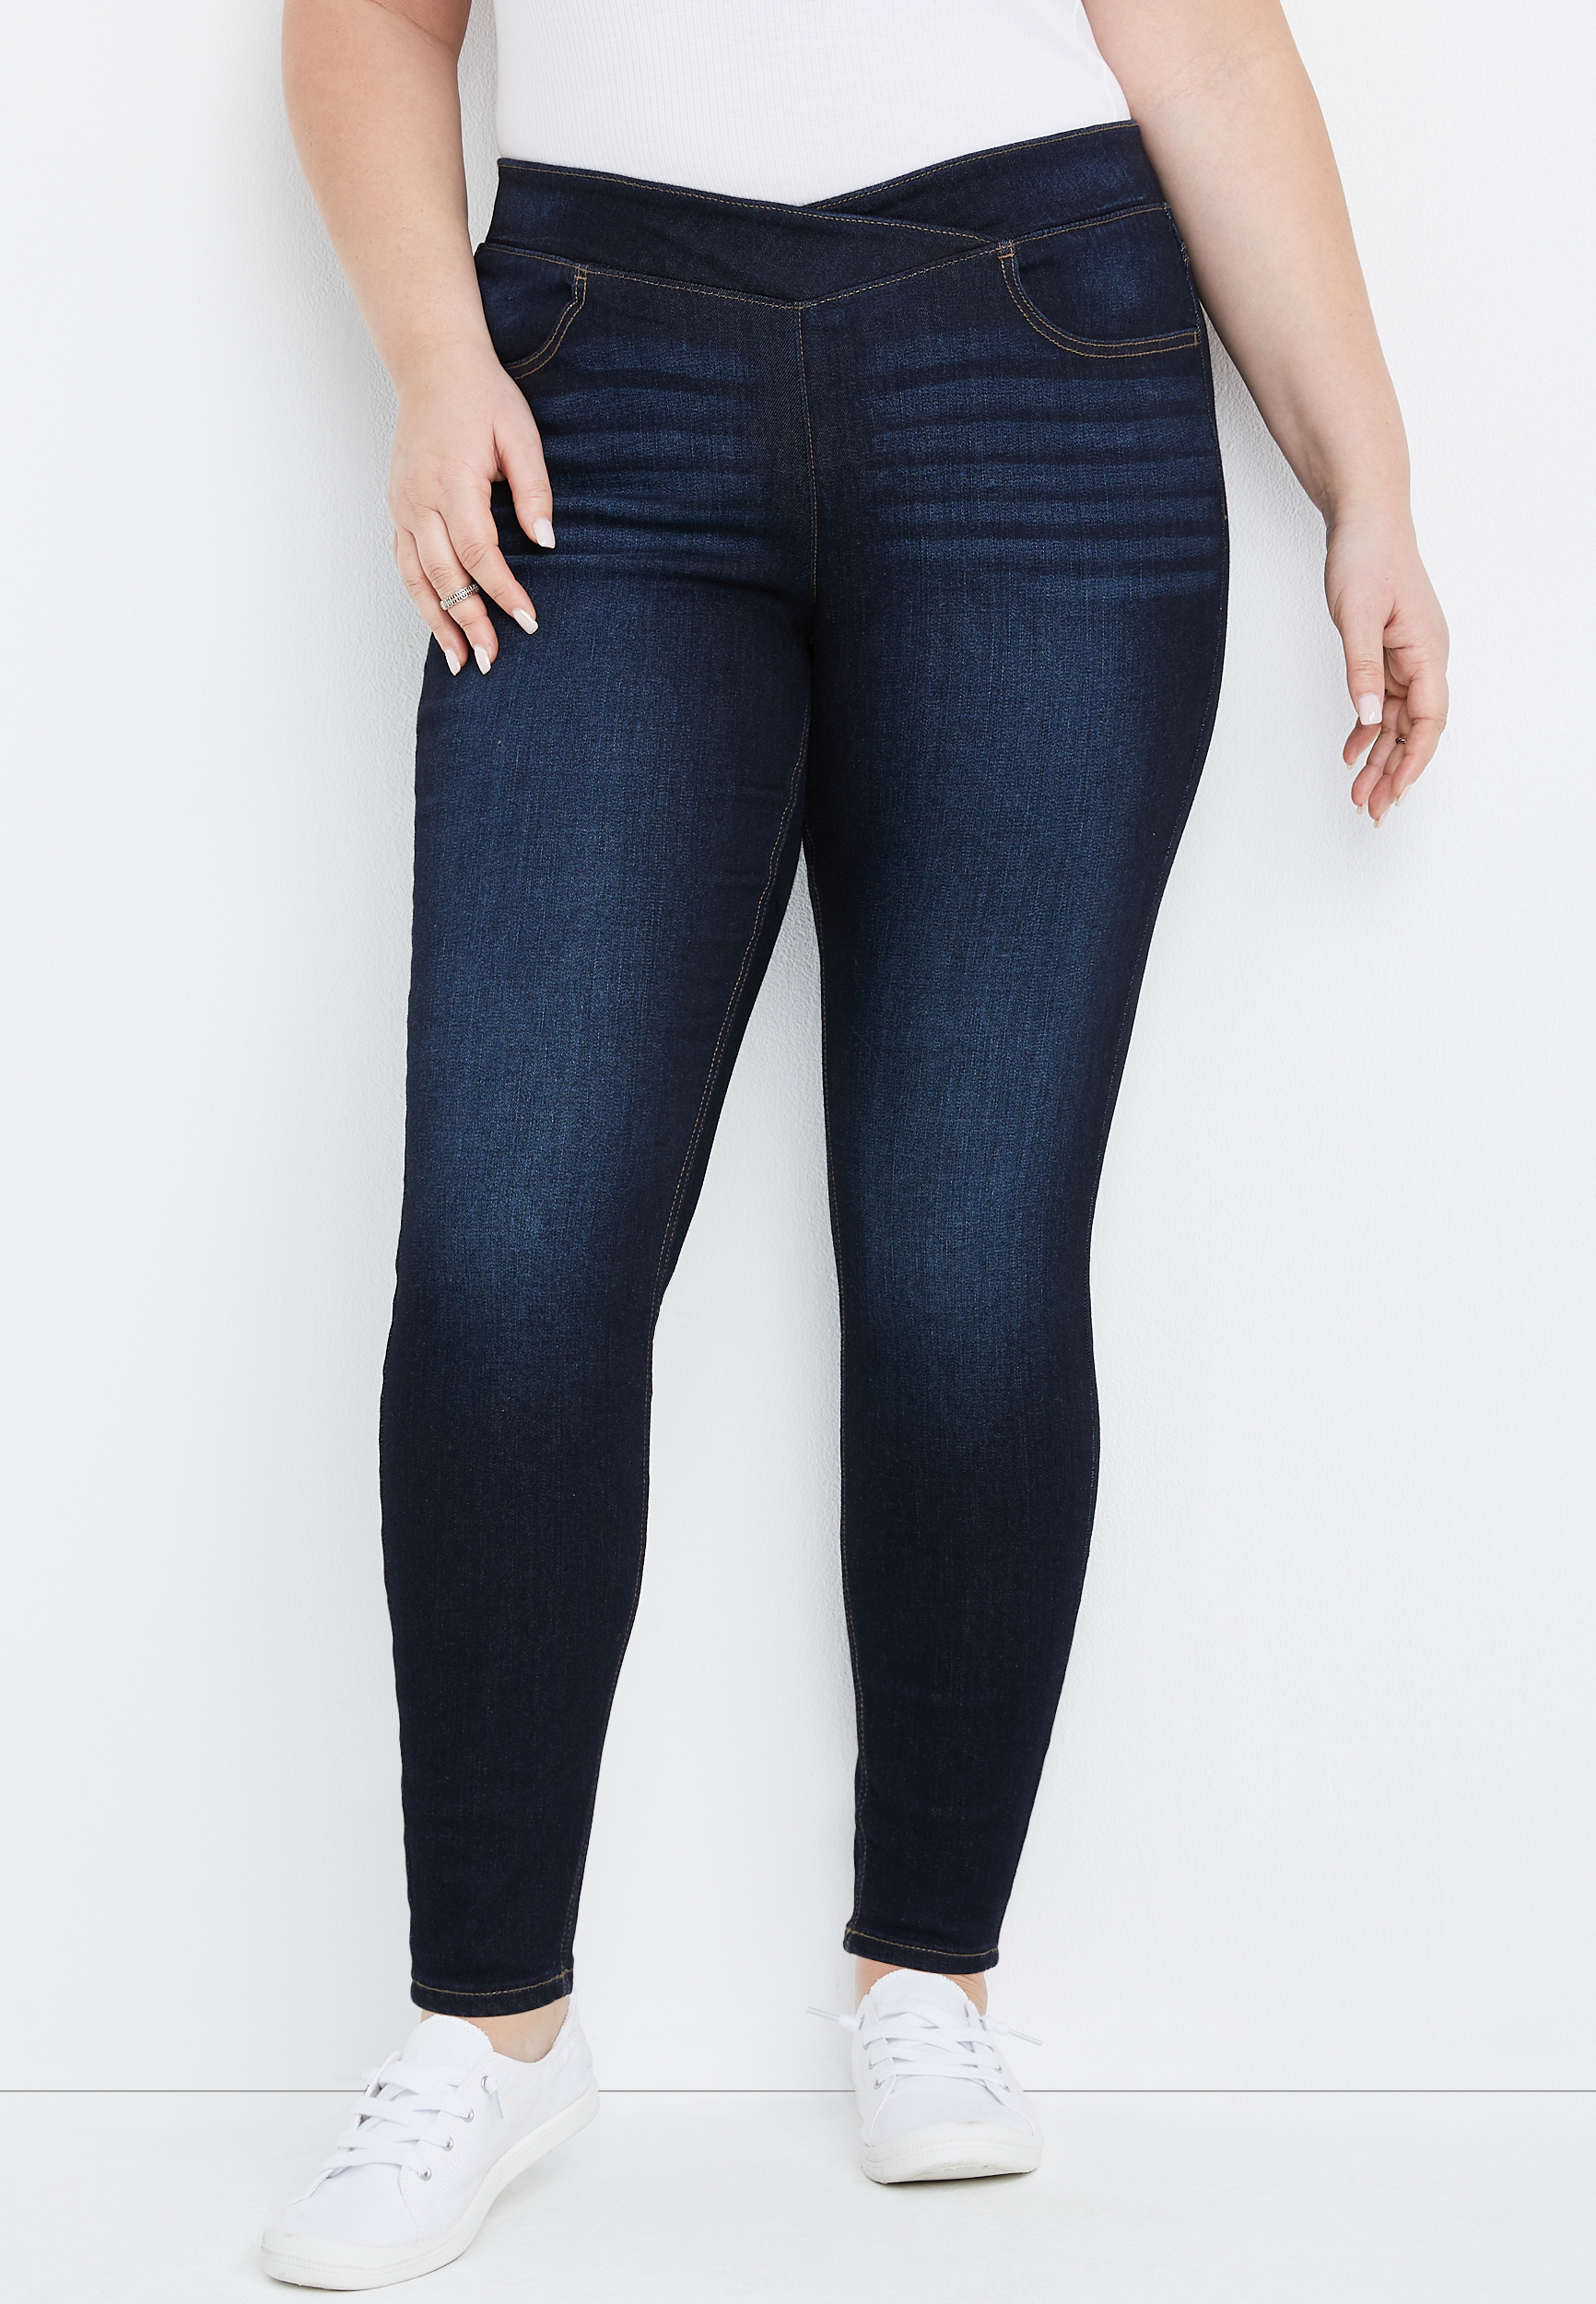 A3 Denim Women's Plus Size High Rise Pull-On Jeggings 